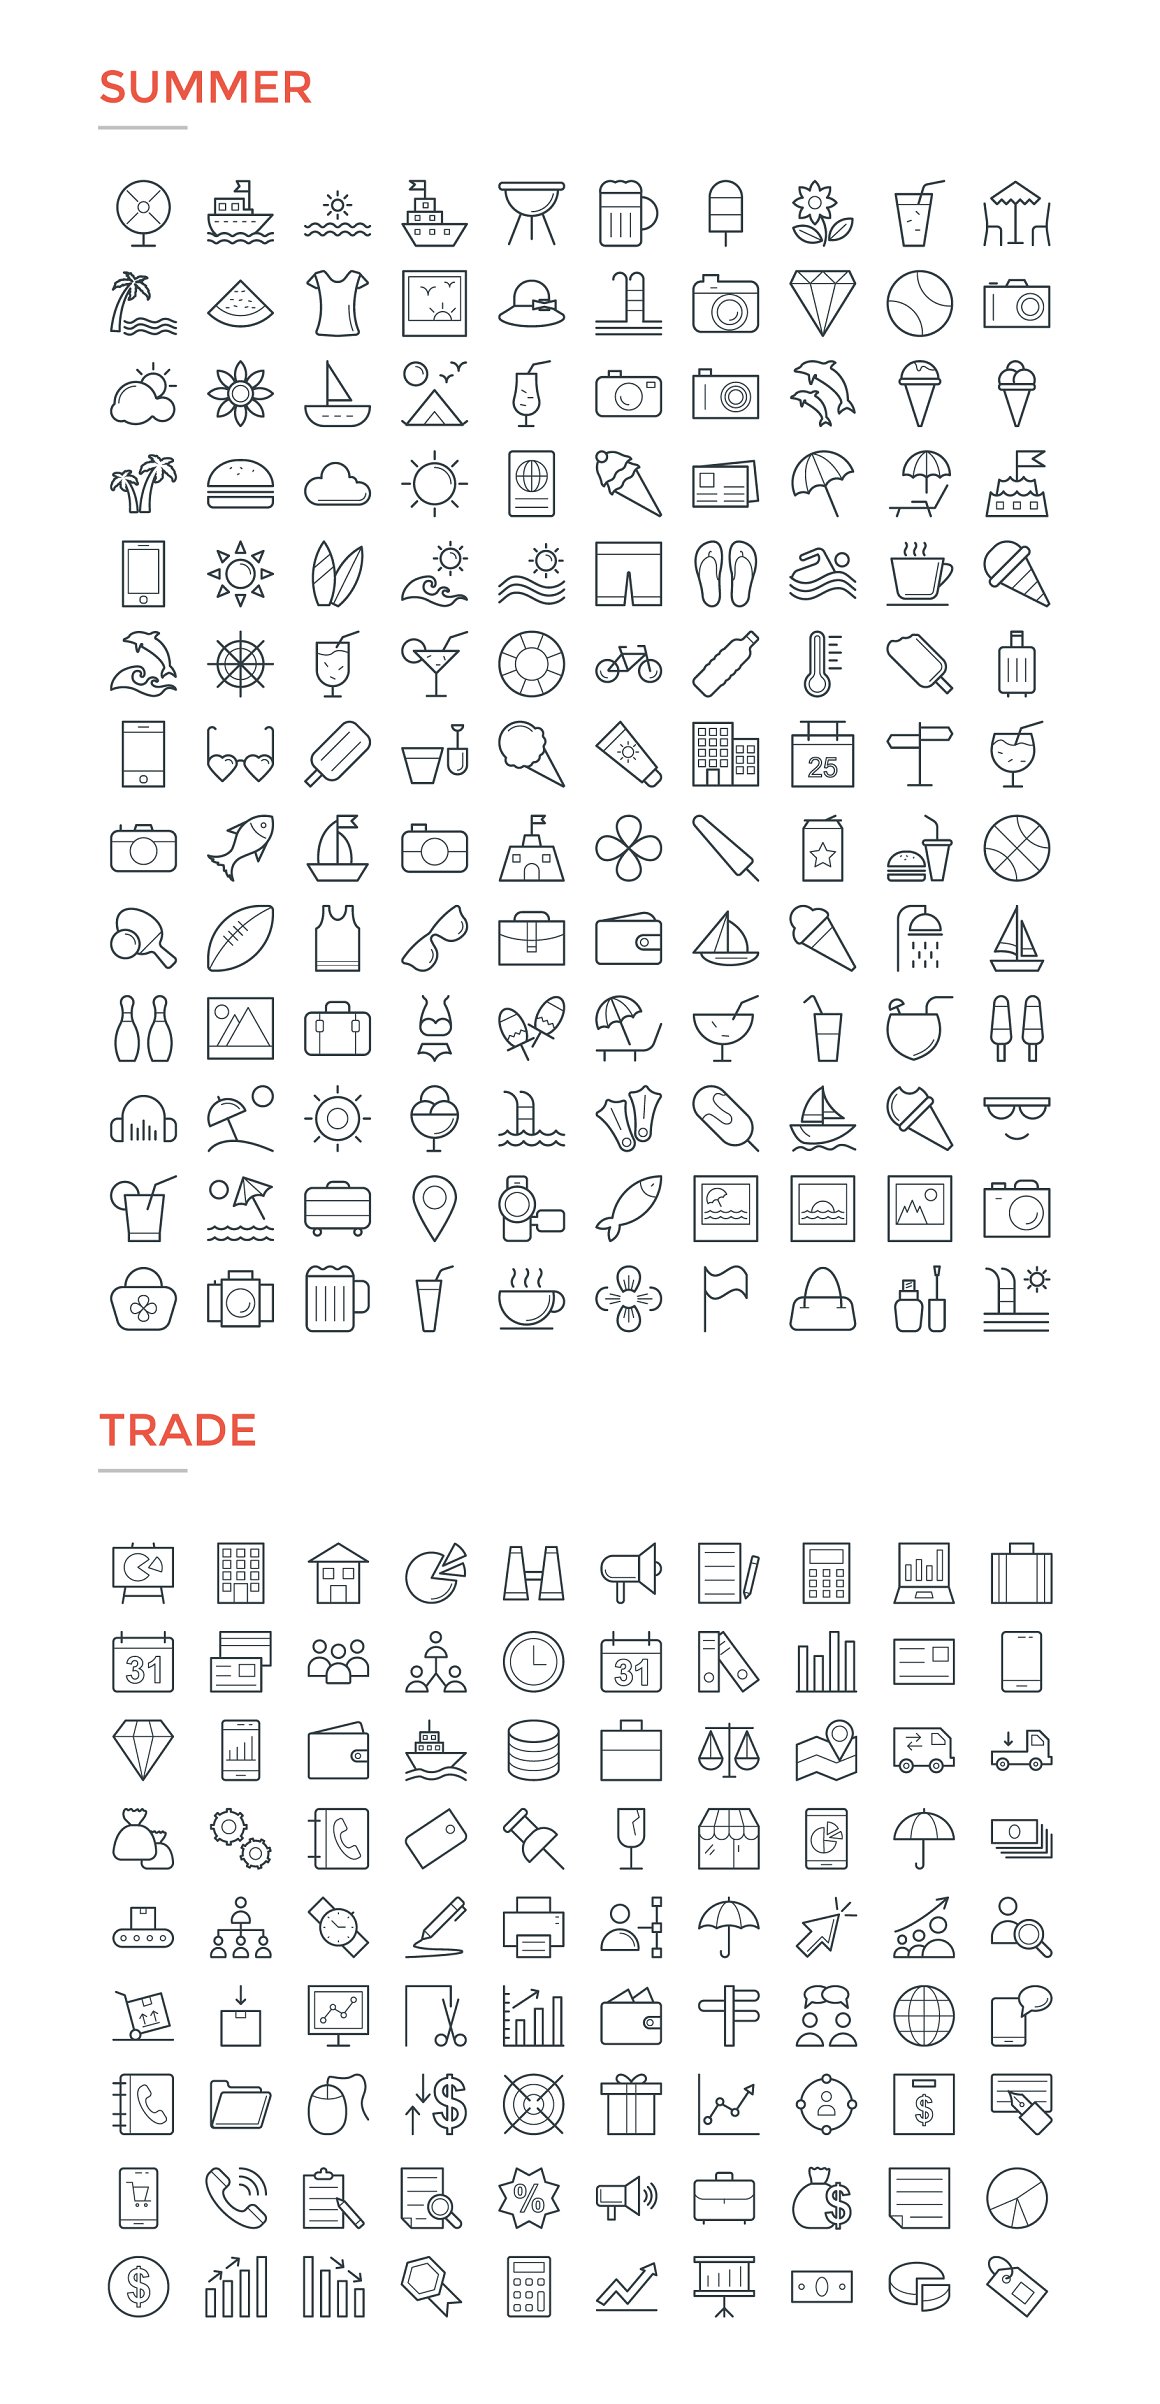 Black set of summer and trade icons on a white background.